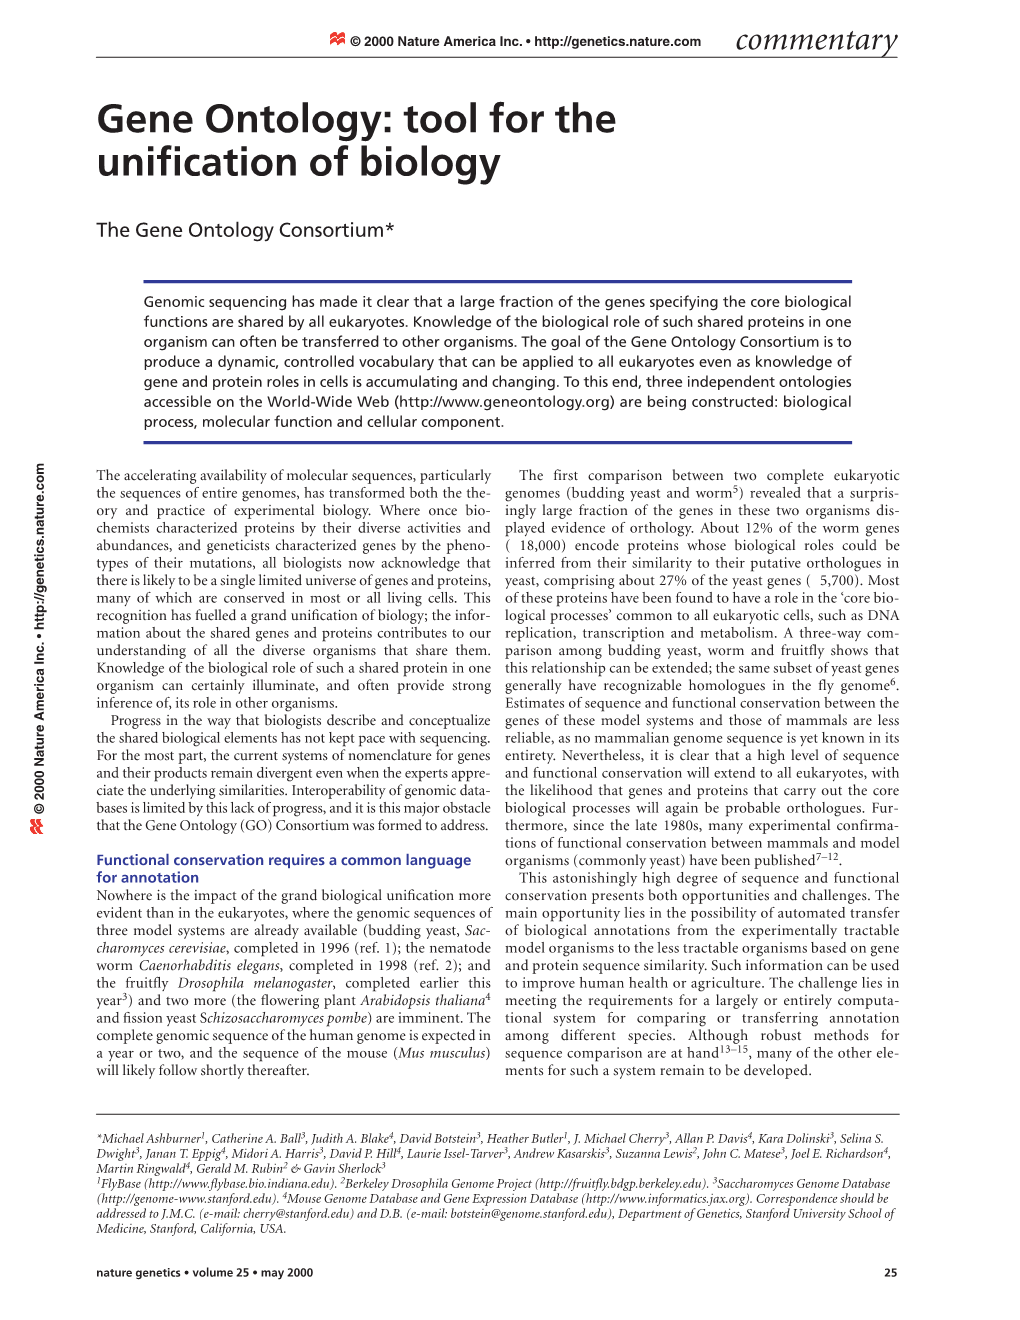 Gene Ontology: Tool for the Unification of Biology